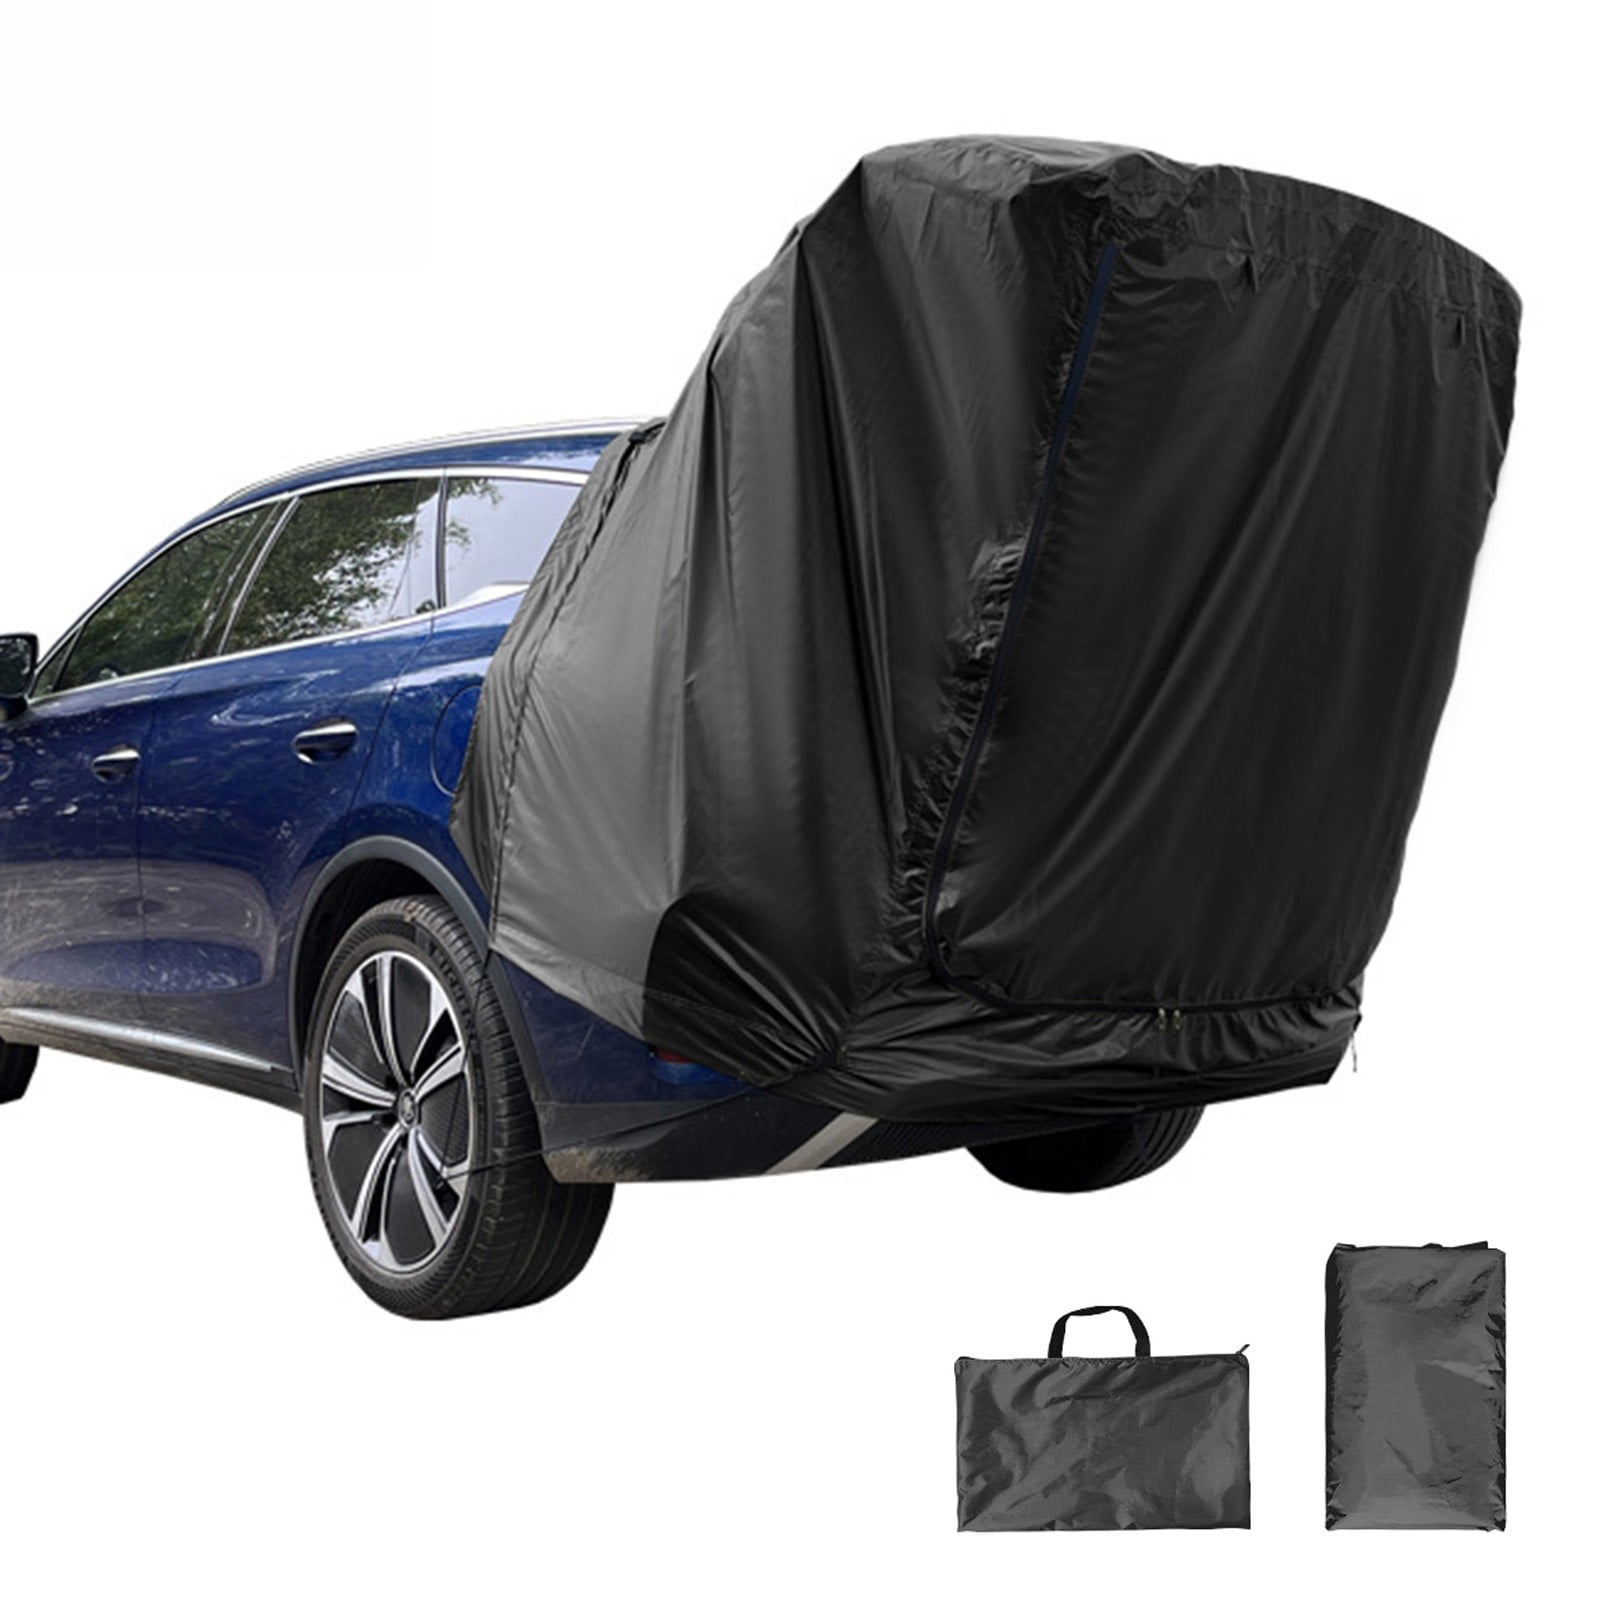 Portable SUV 63x51x39in+ Tent for Hatchback, Tailgate Bed, Rear